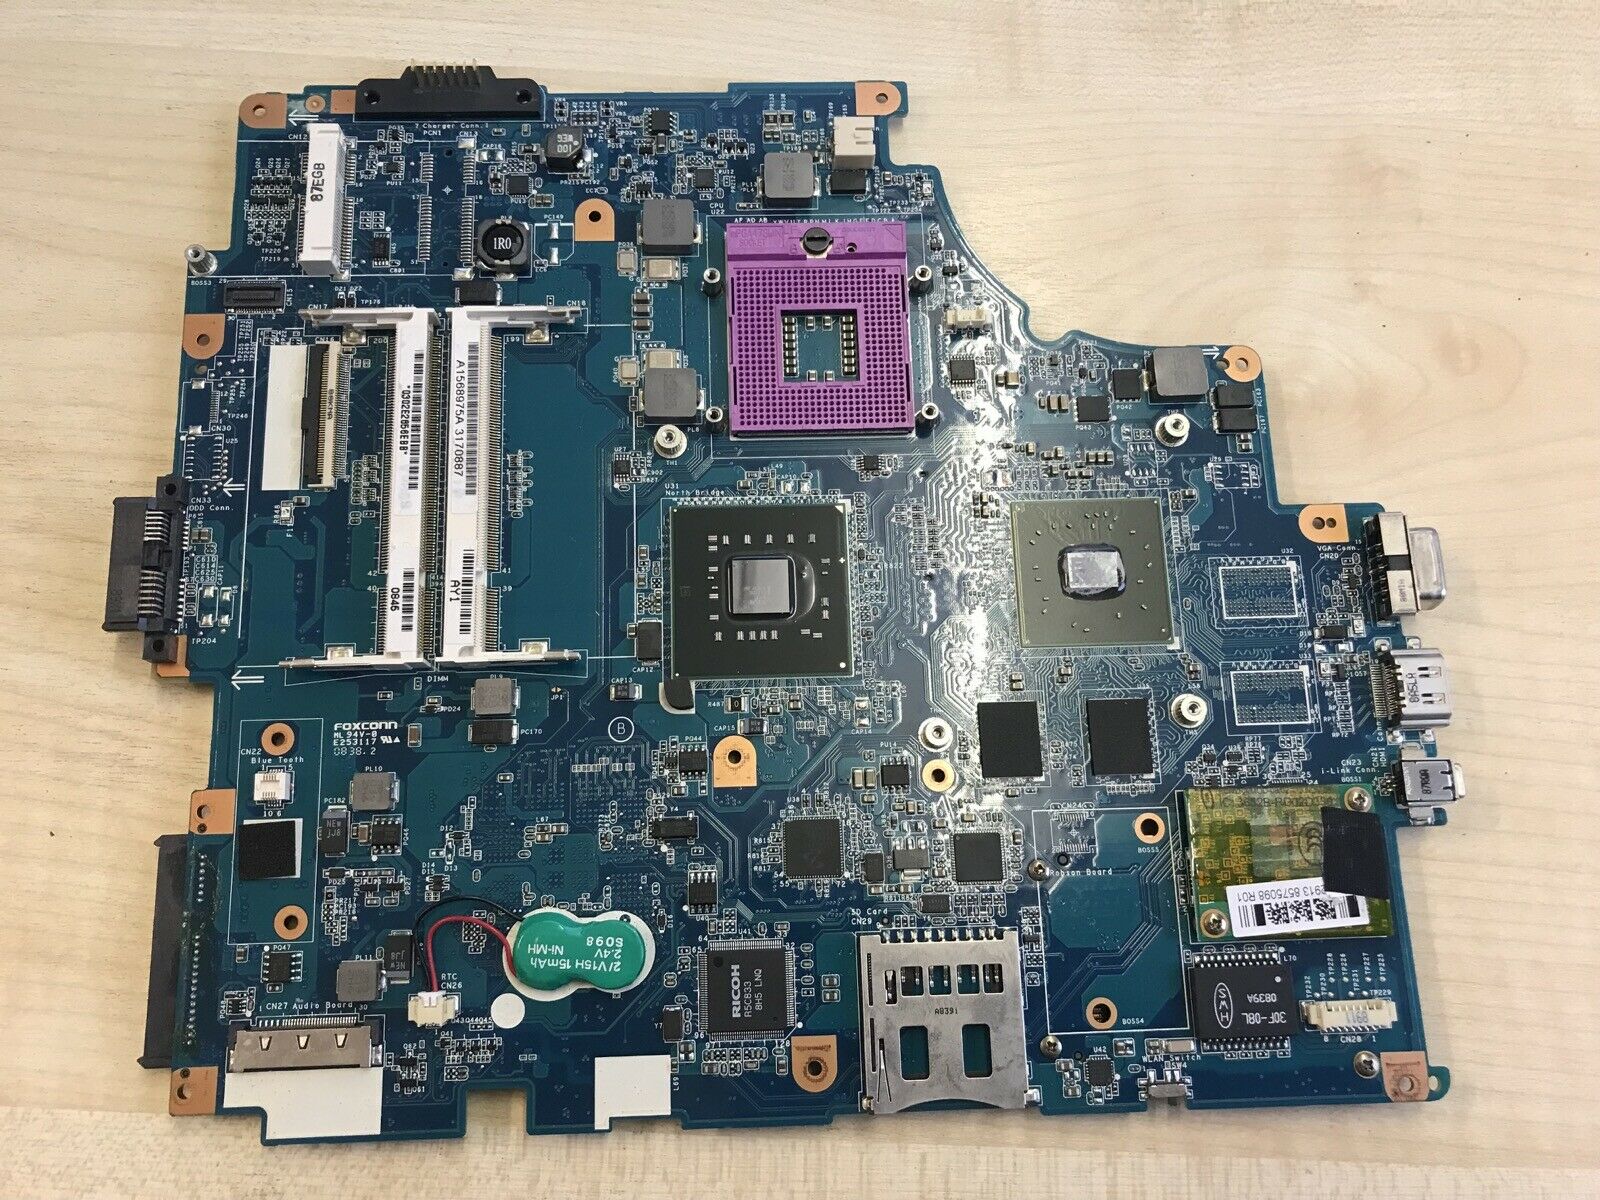 Sony VAIO VGN-FW Series VGN-FW21L PCG-3D1M Motherboard MBX-189 A1568975A TESTED Brand: Sony Memory Type: